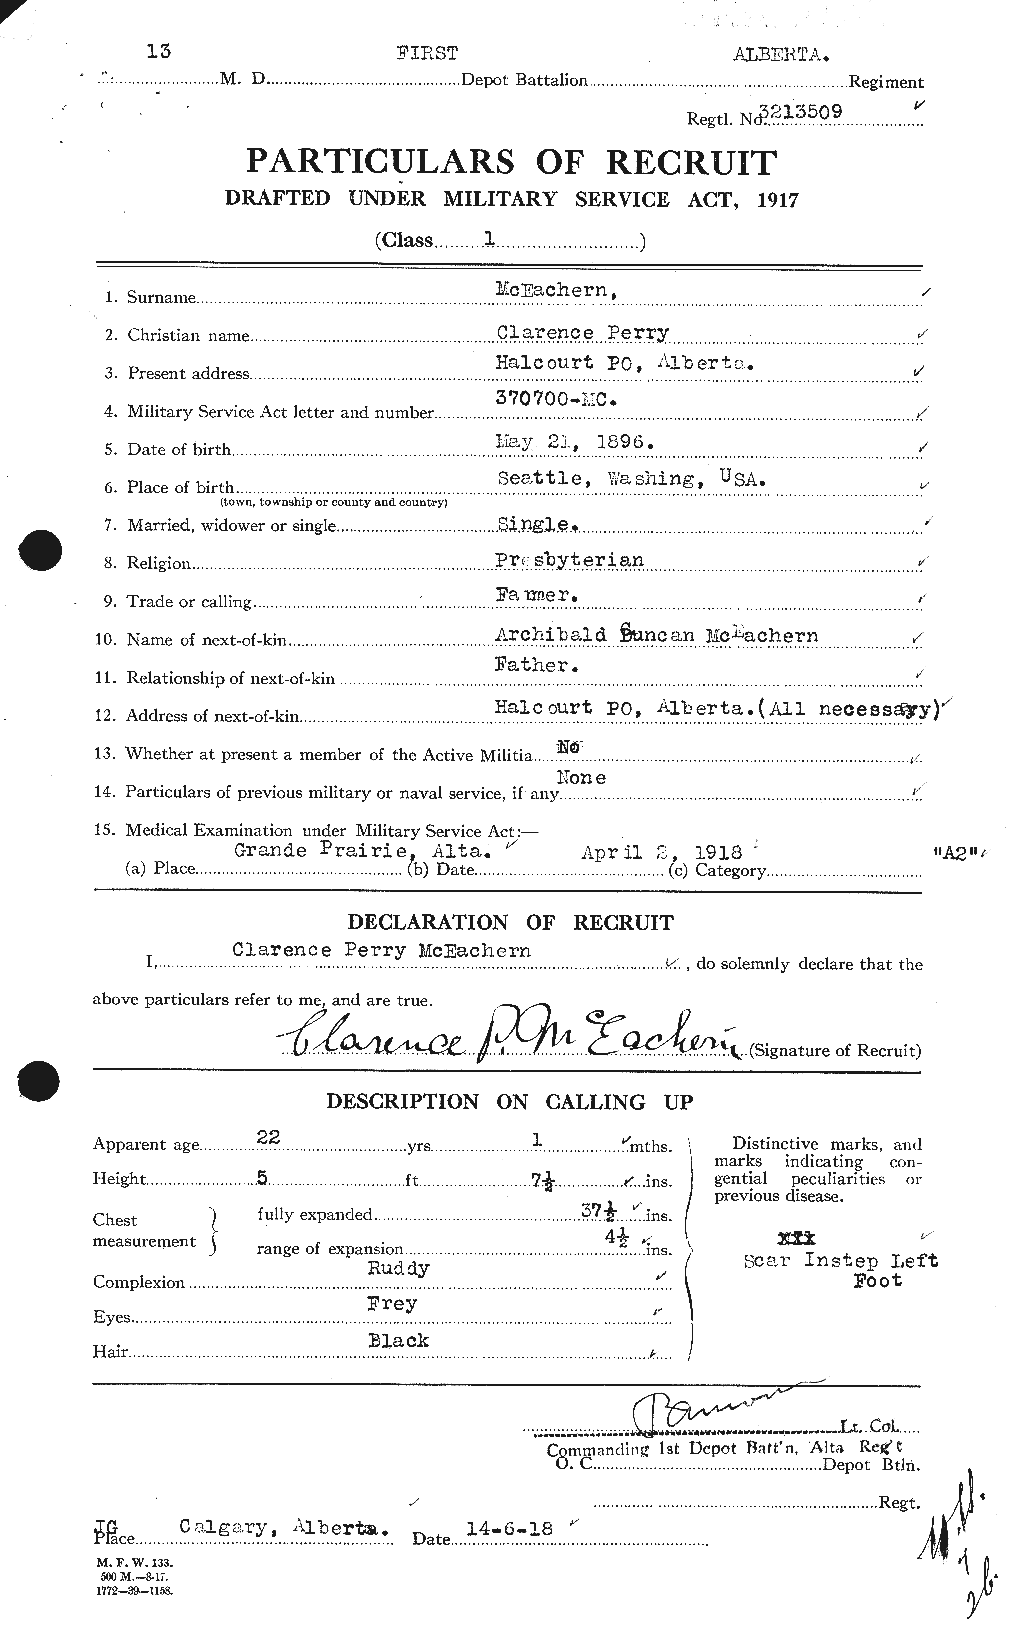 Personnel Records of the First World War - CEF 520816a